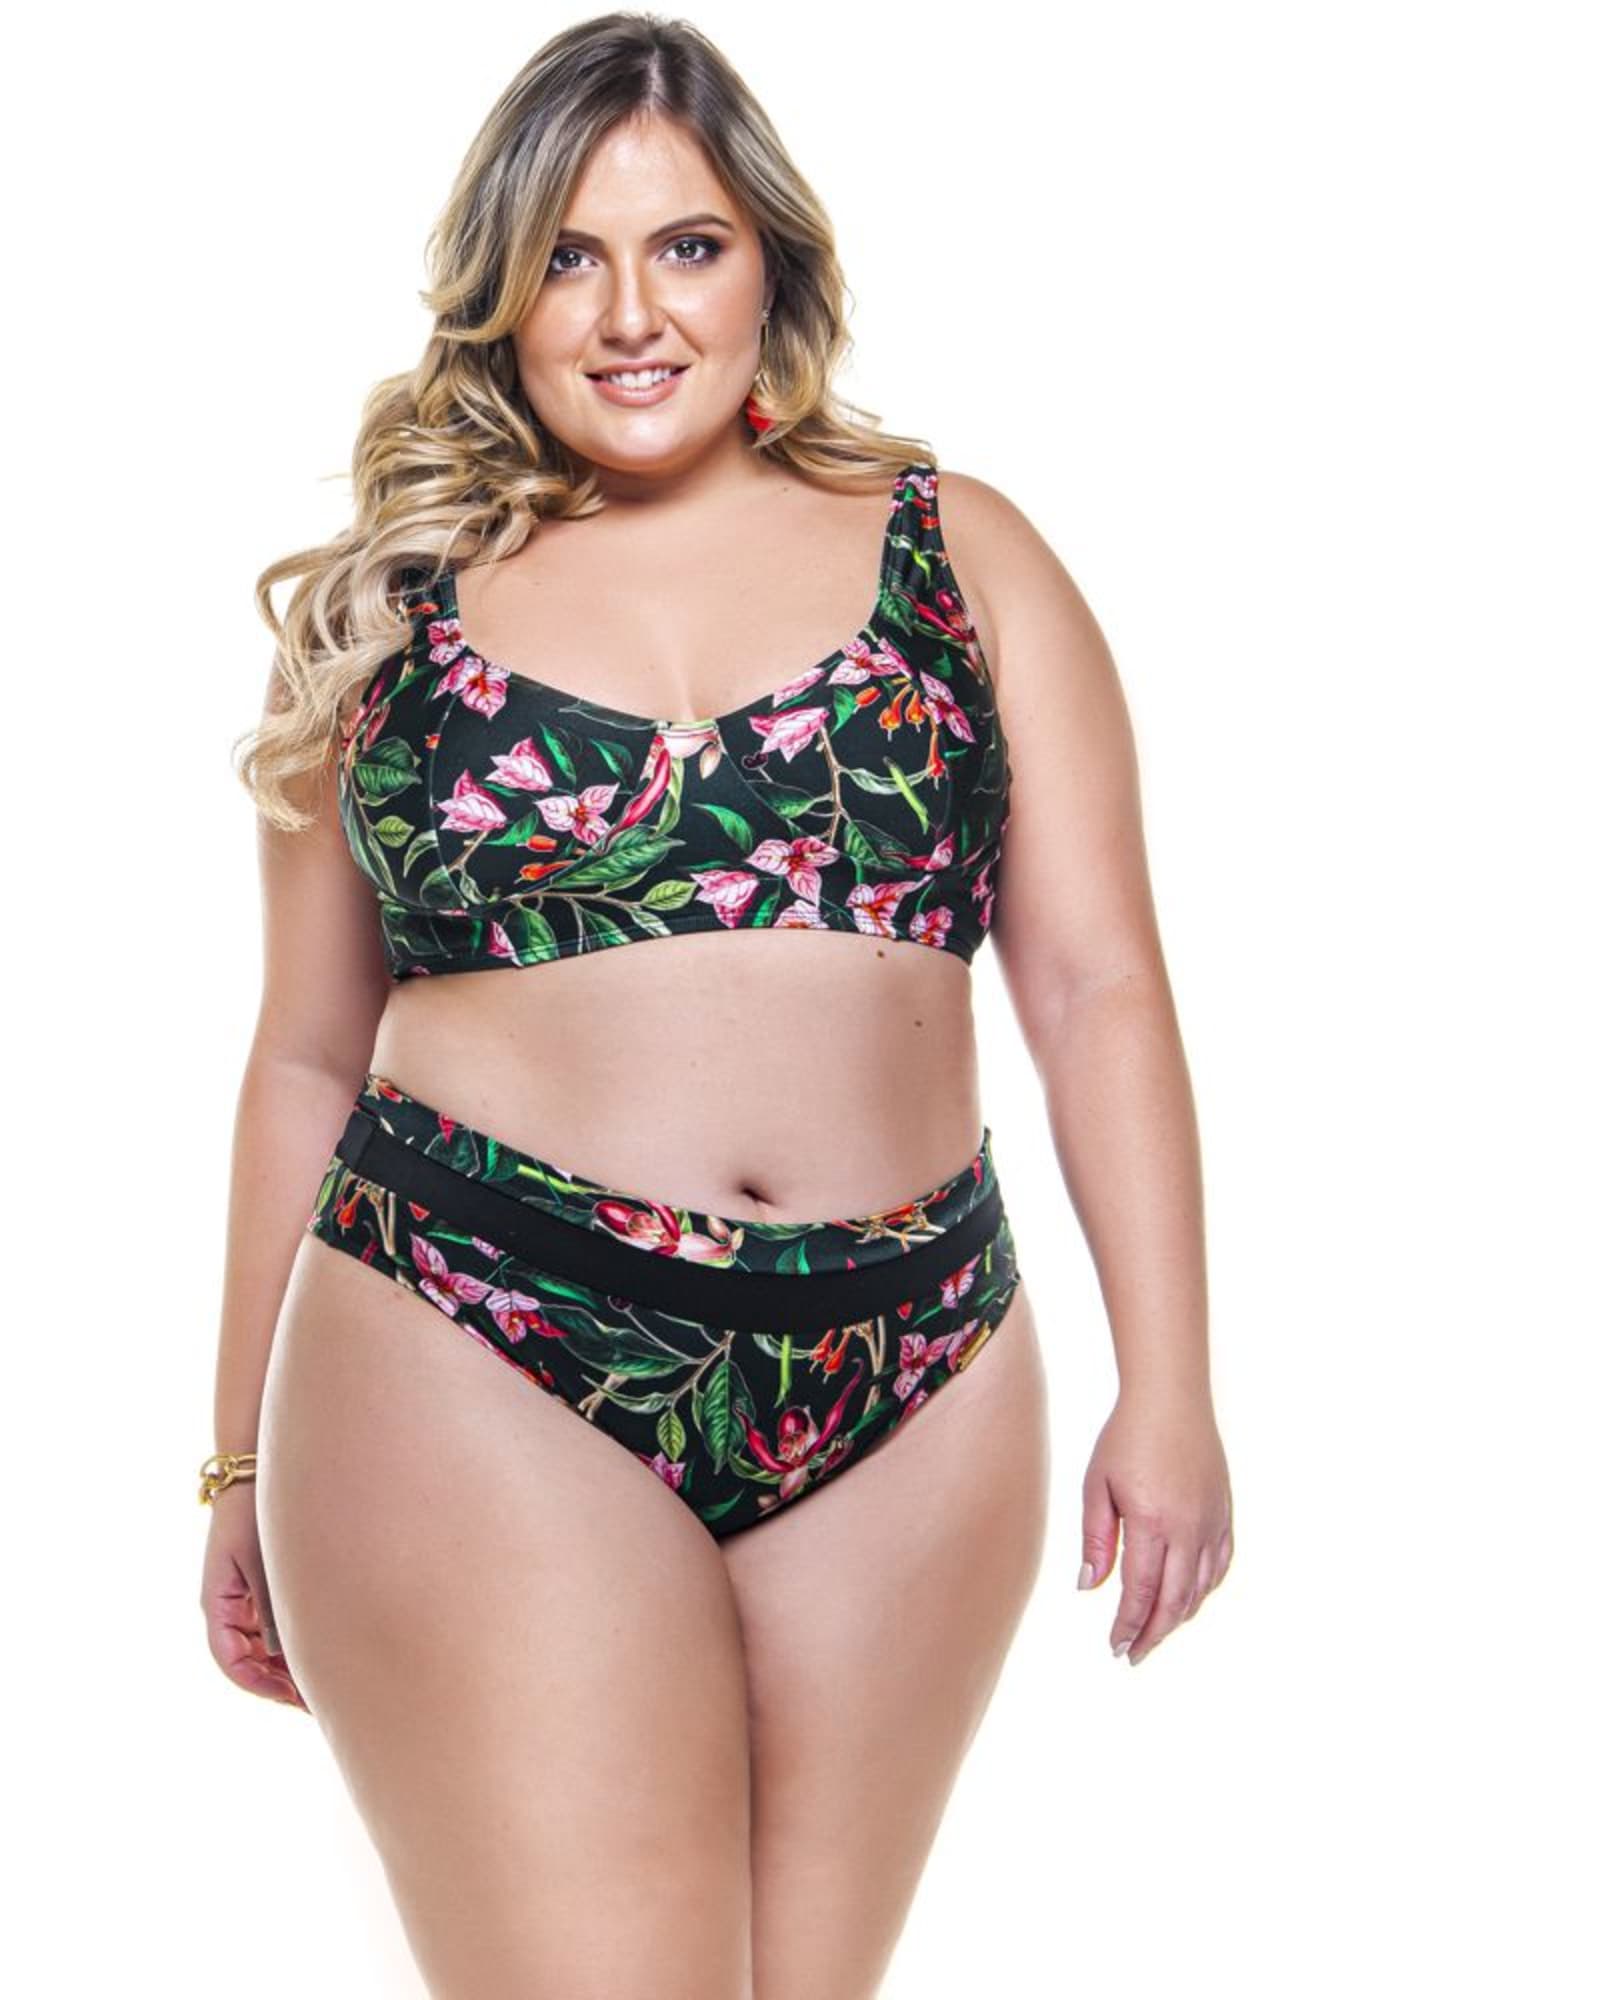 Kastiza Plus Size Strapless Compression Bra With Removable Padded Top And  Seamless Spaghetti Straps From Weilad, $9.58